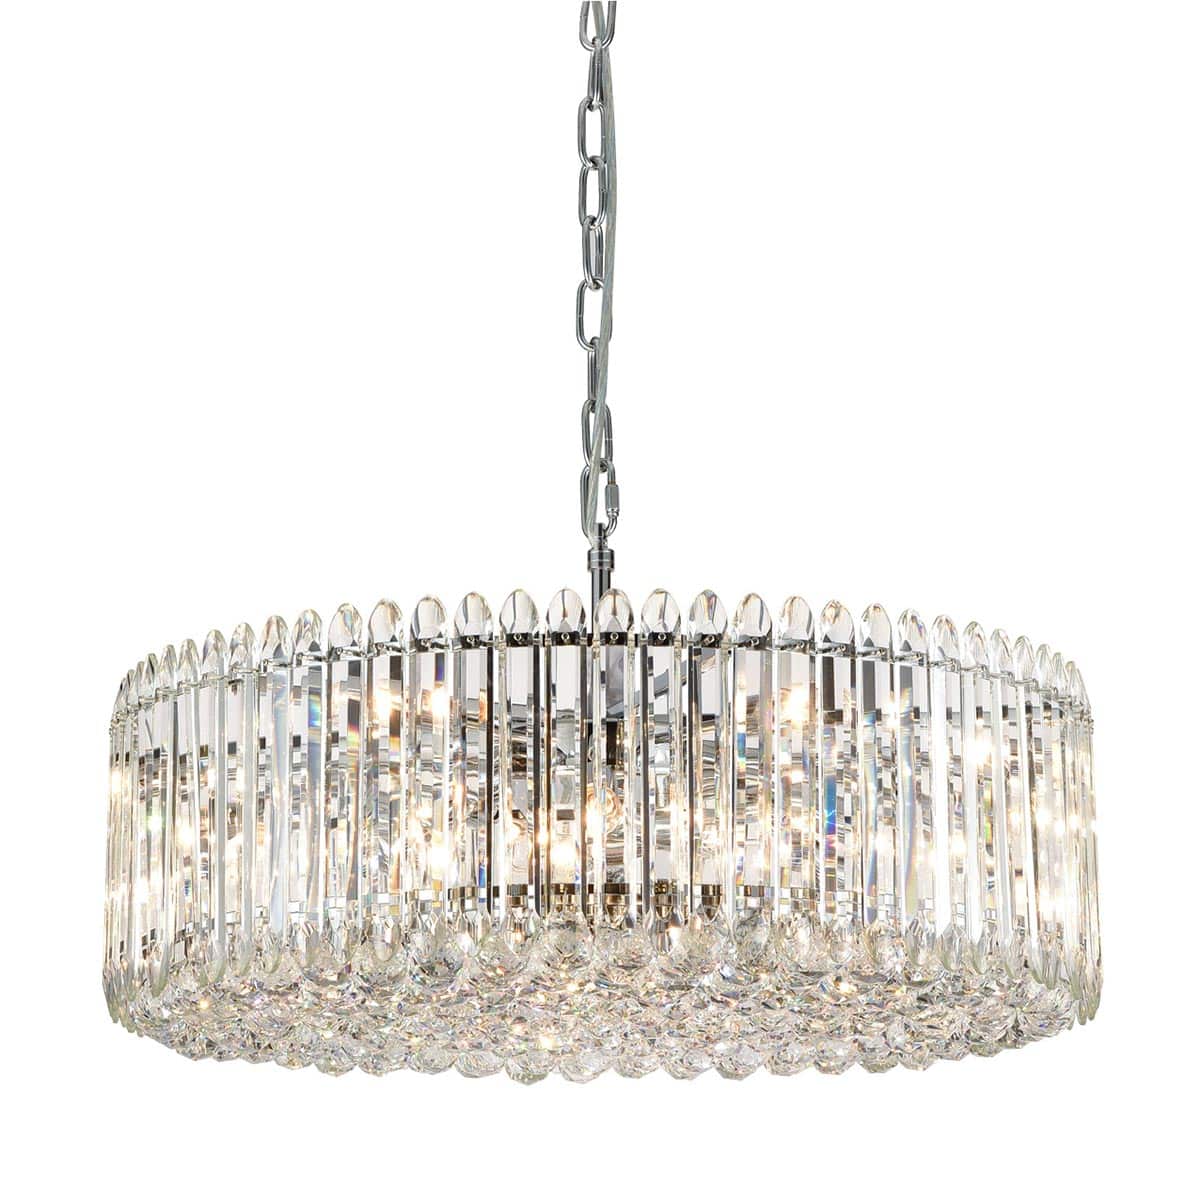 Classic Quality 15 Light Luxury Crystal Chandelier Polished Chrome